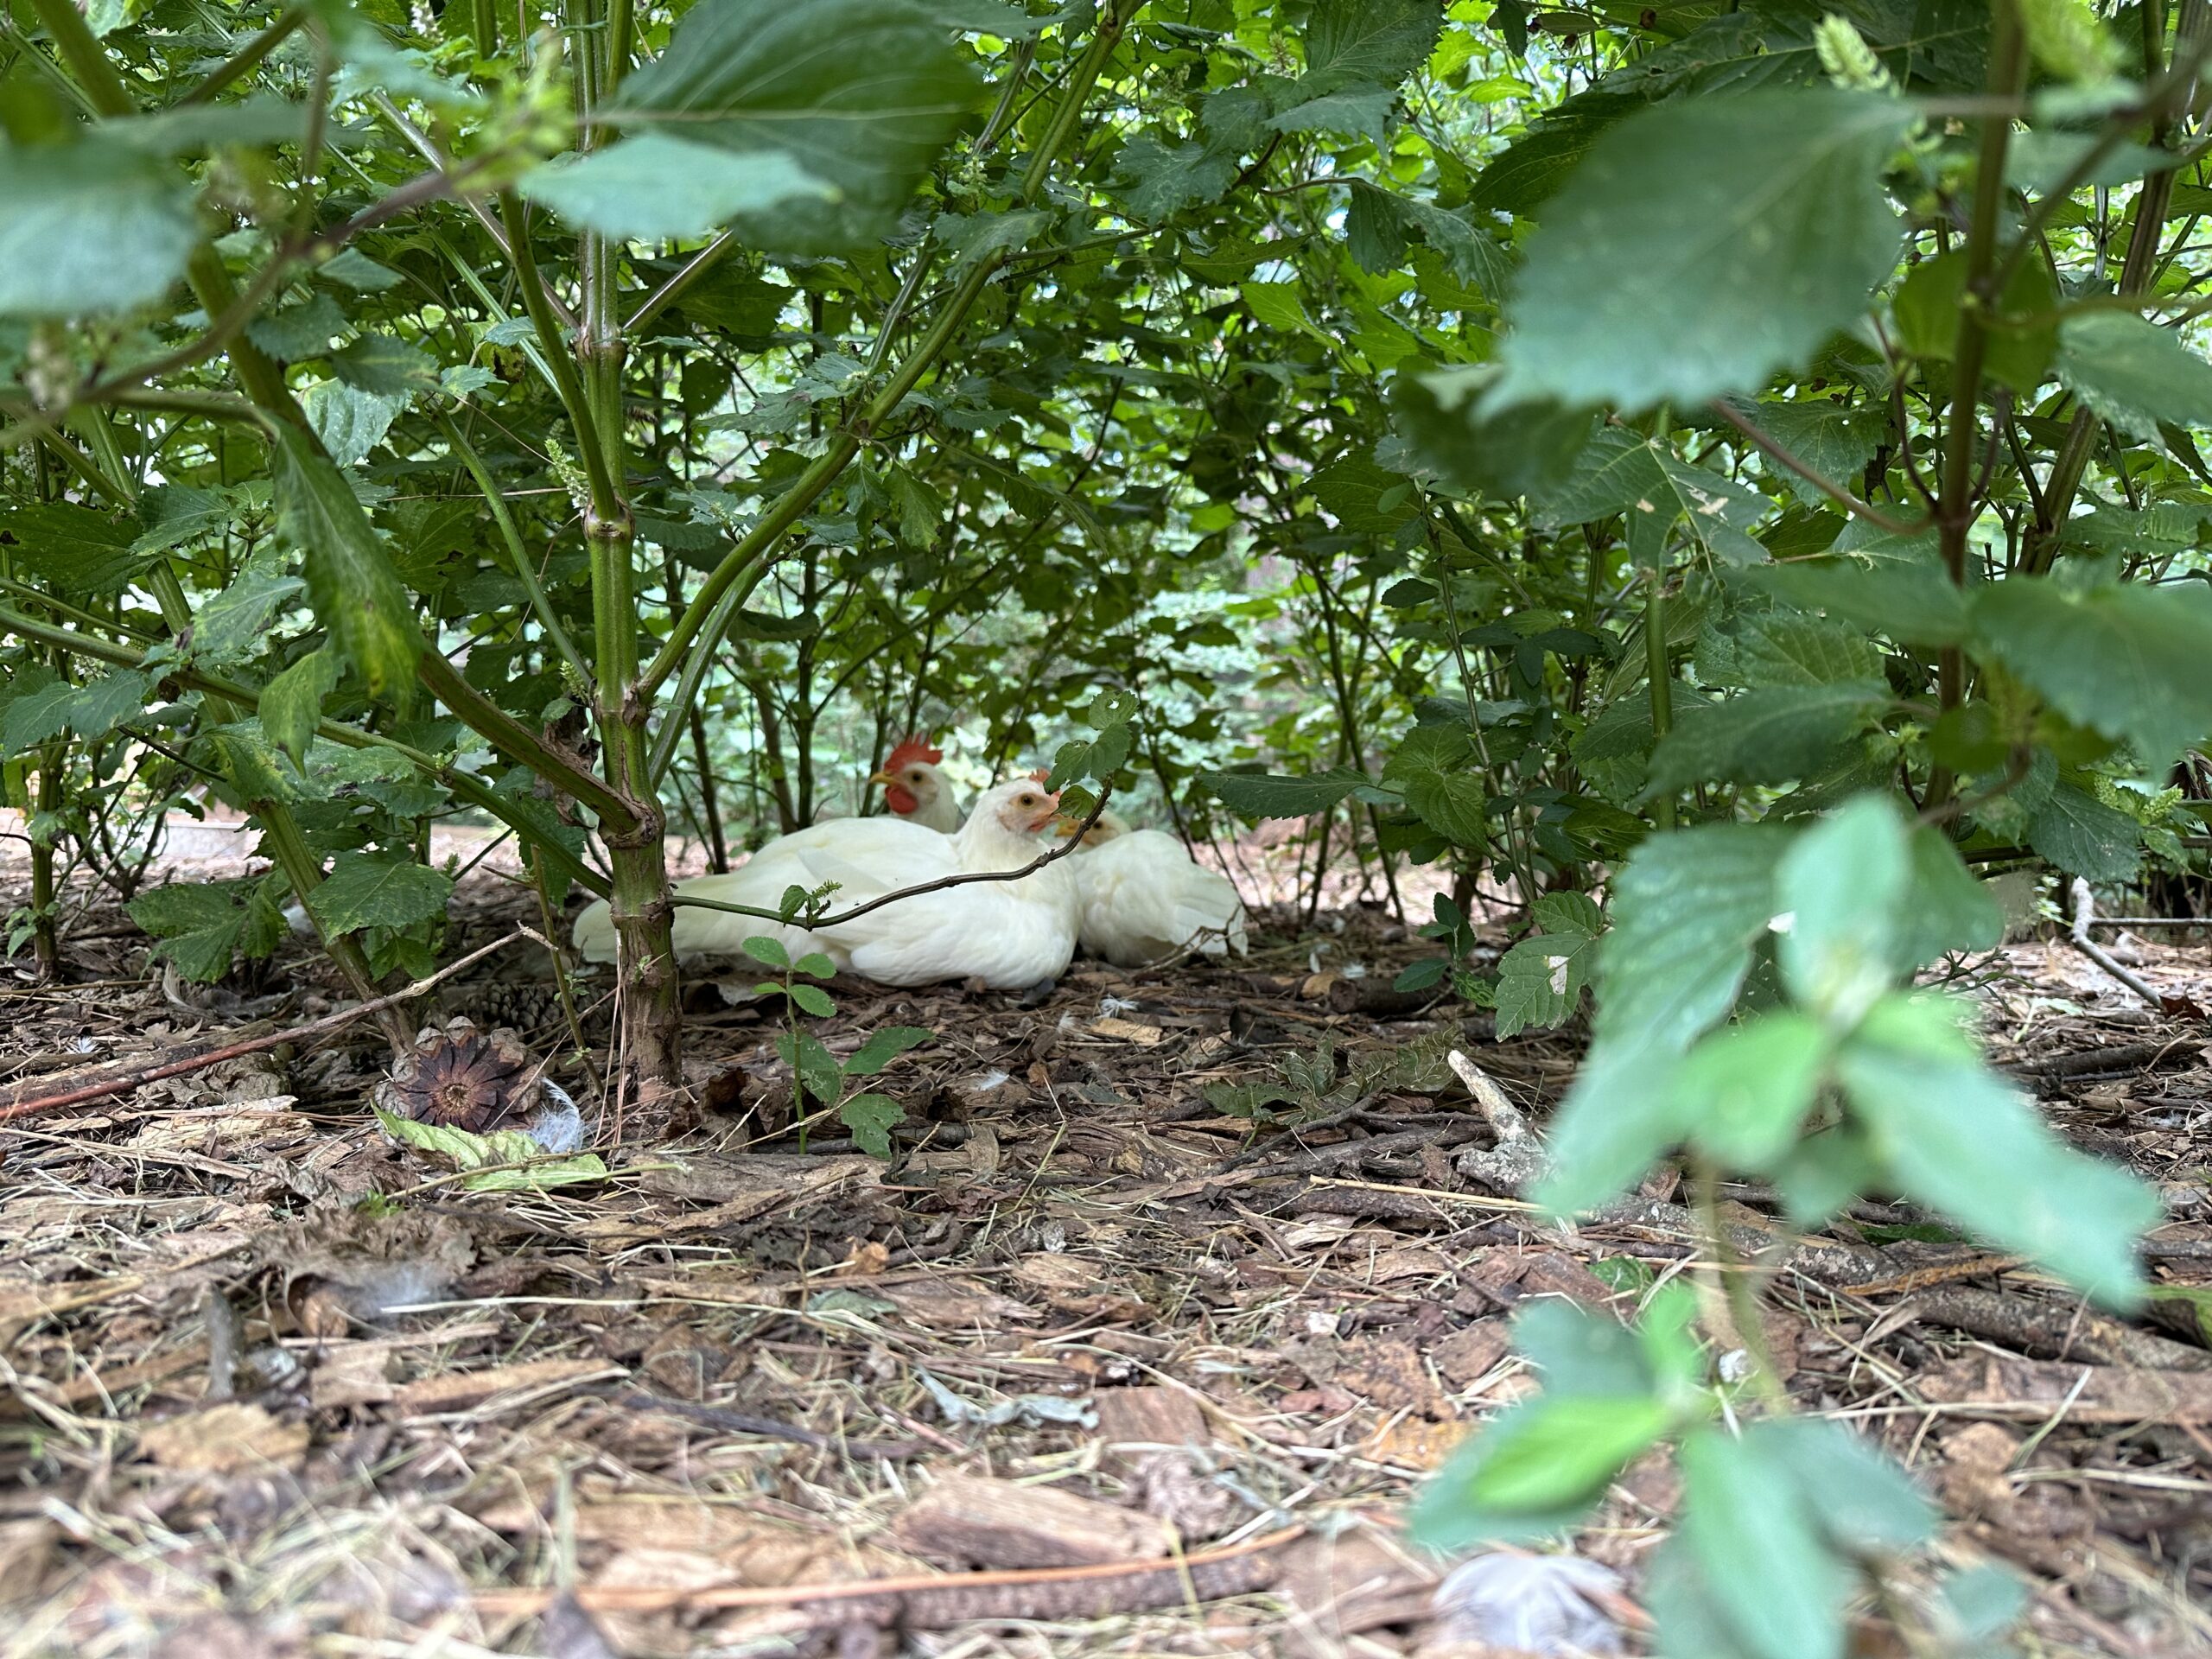 Our chickens love hanging out under the cover of vegetation.